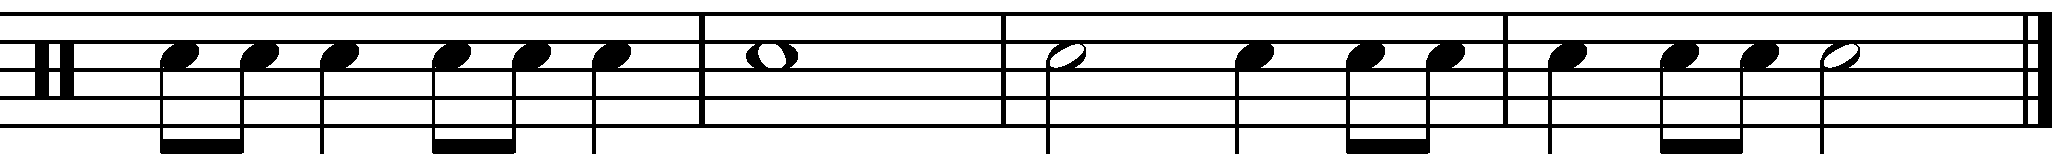 An example snare drum rhythm.